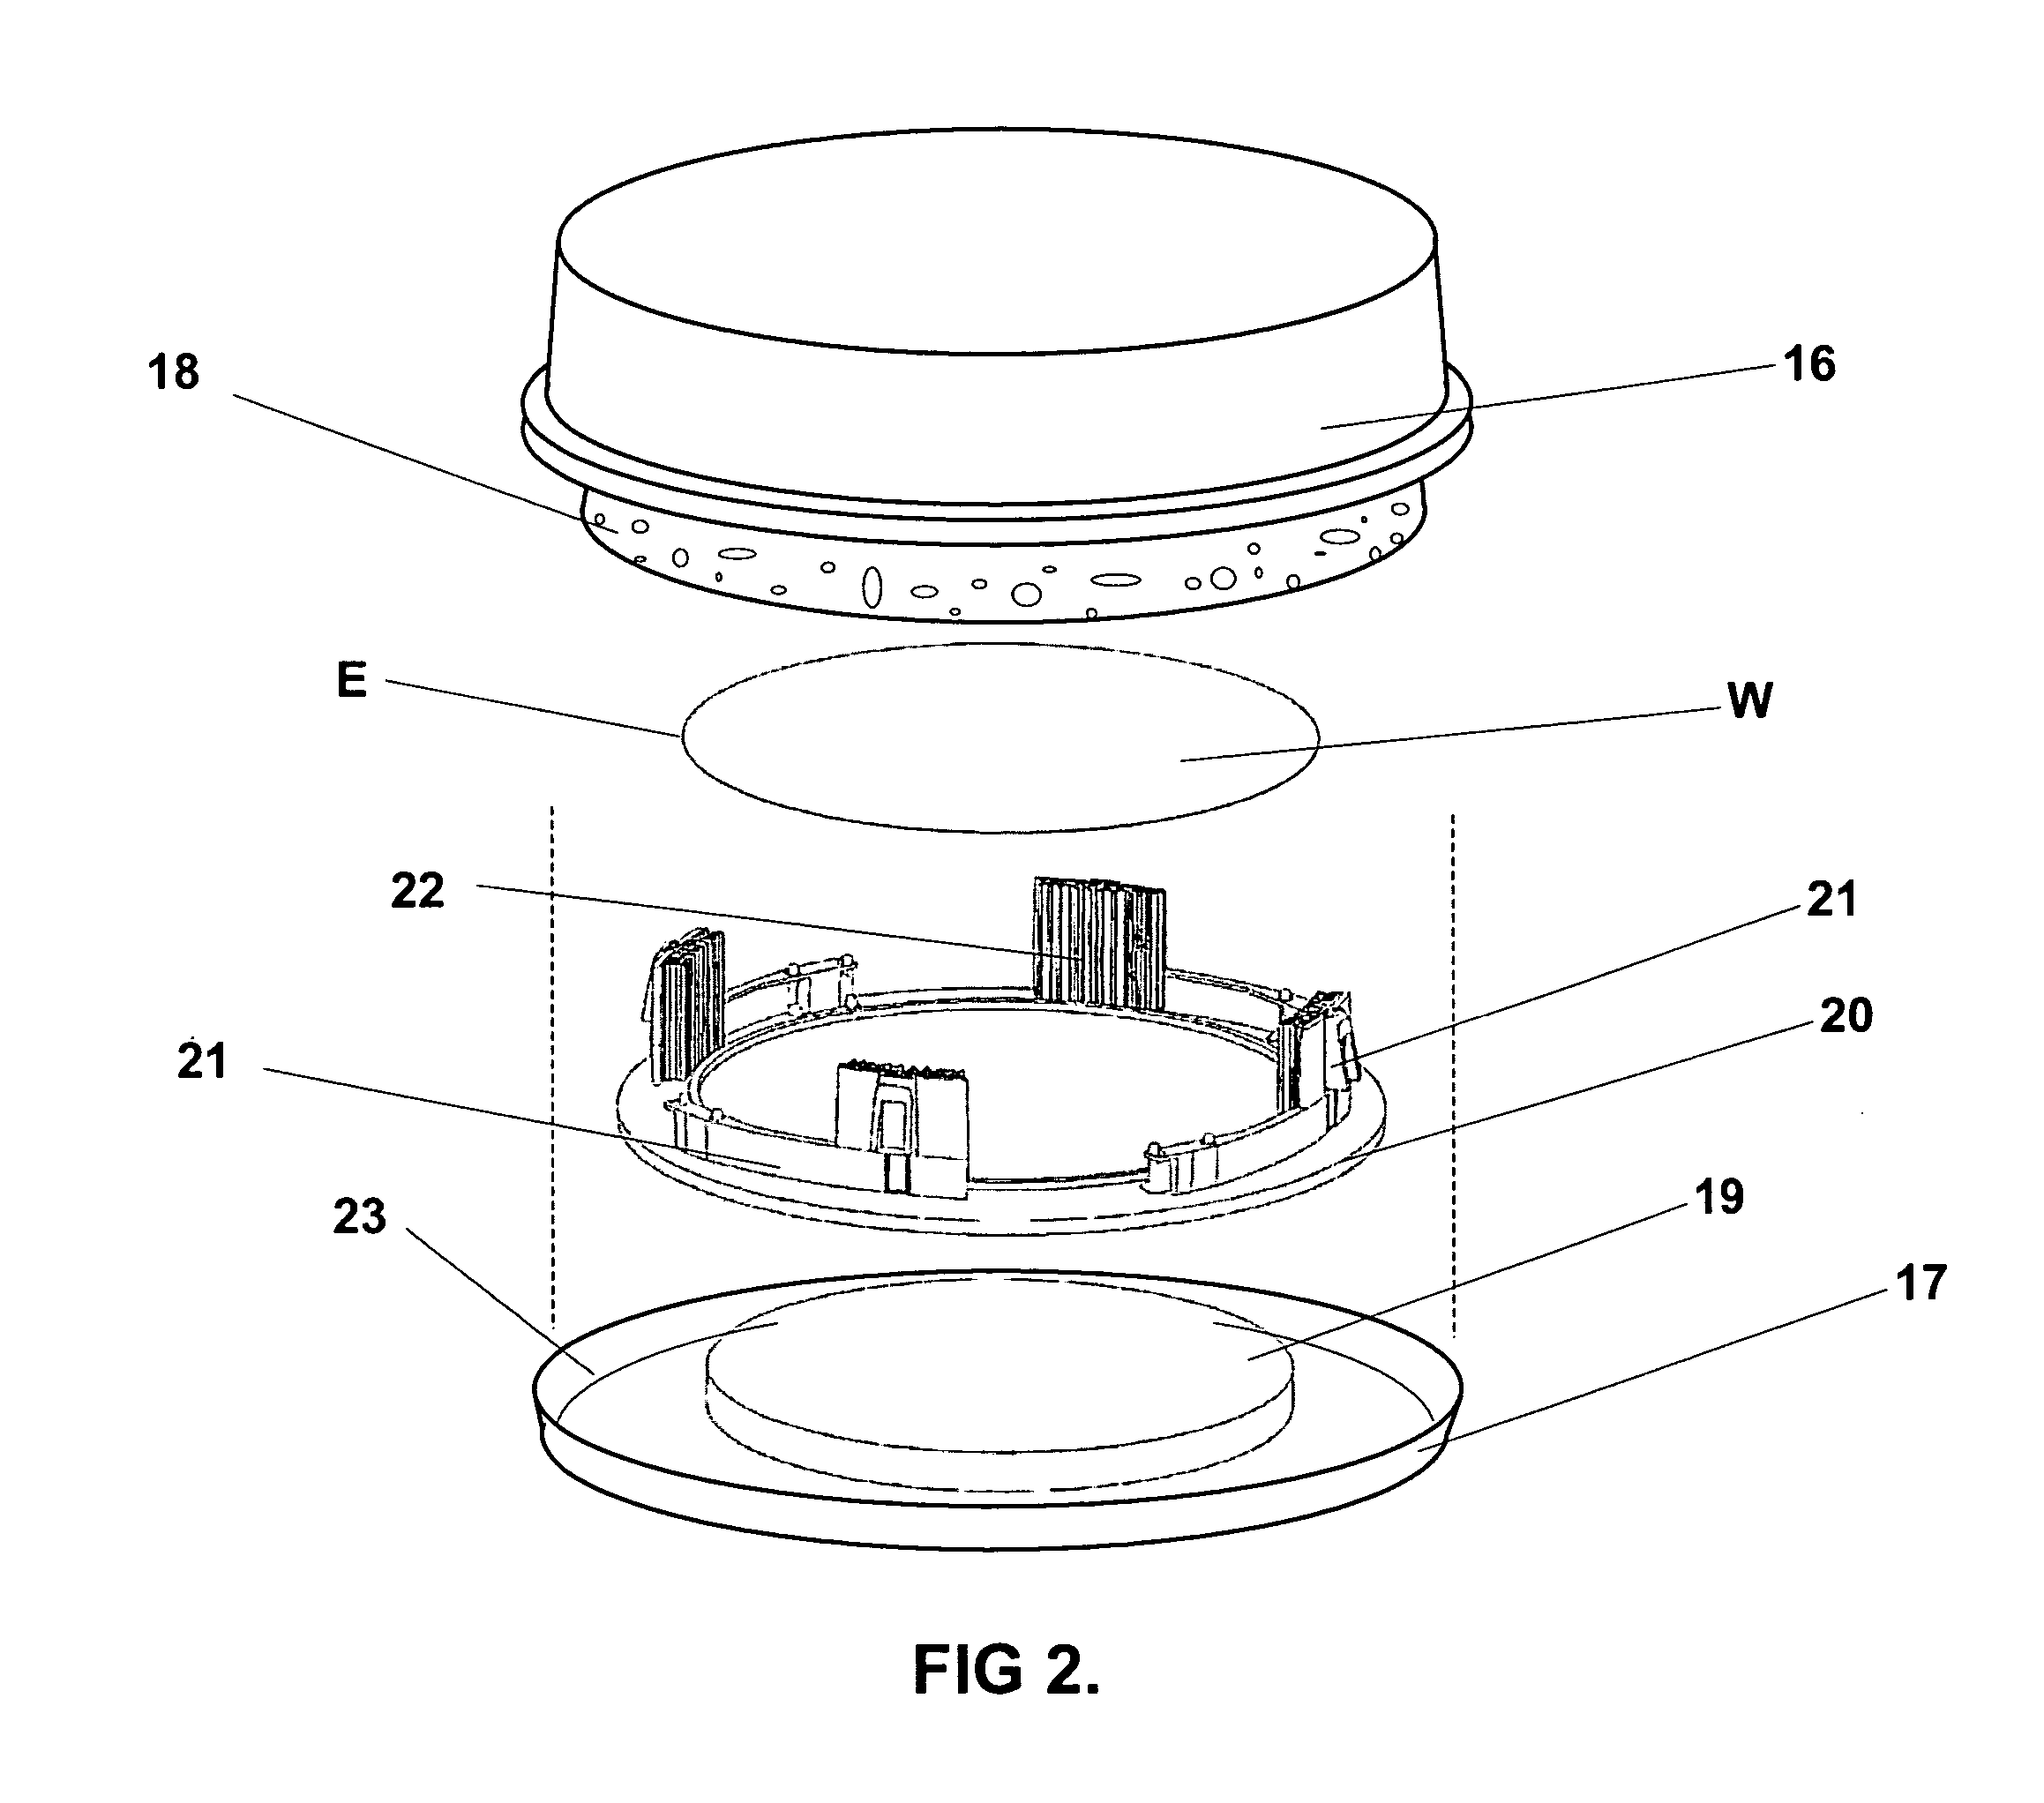 Integrated circuit wafer packaging system and method